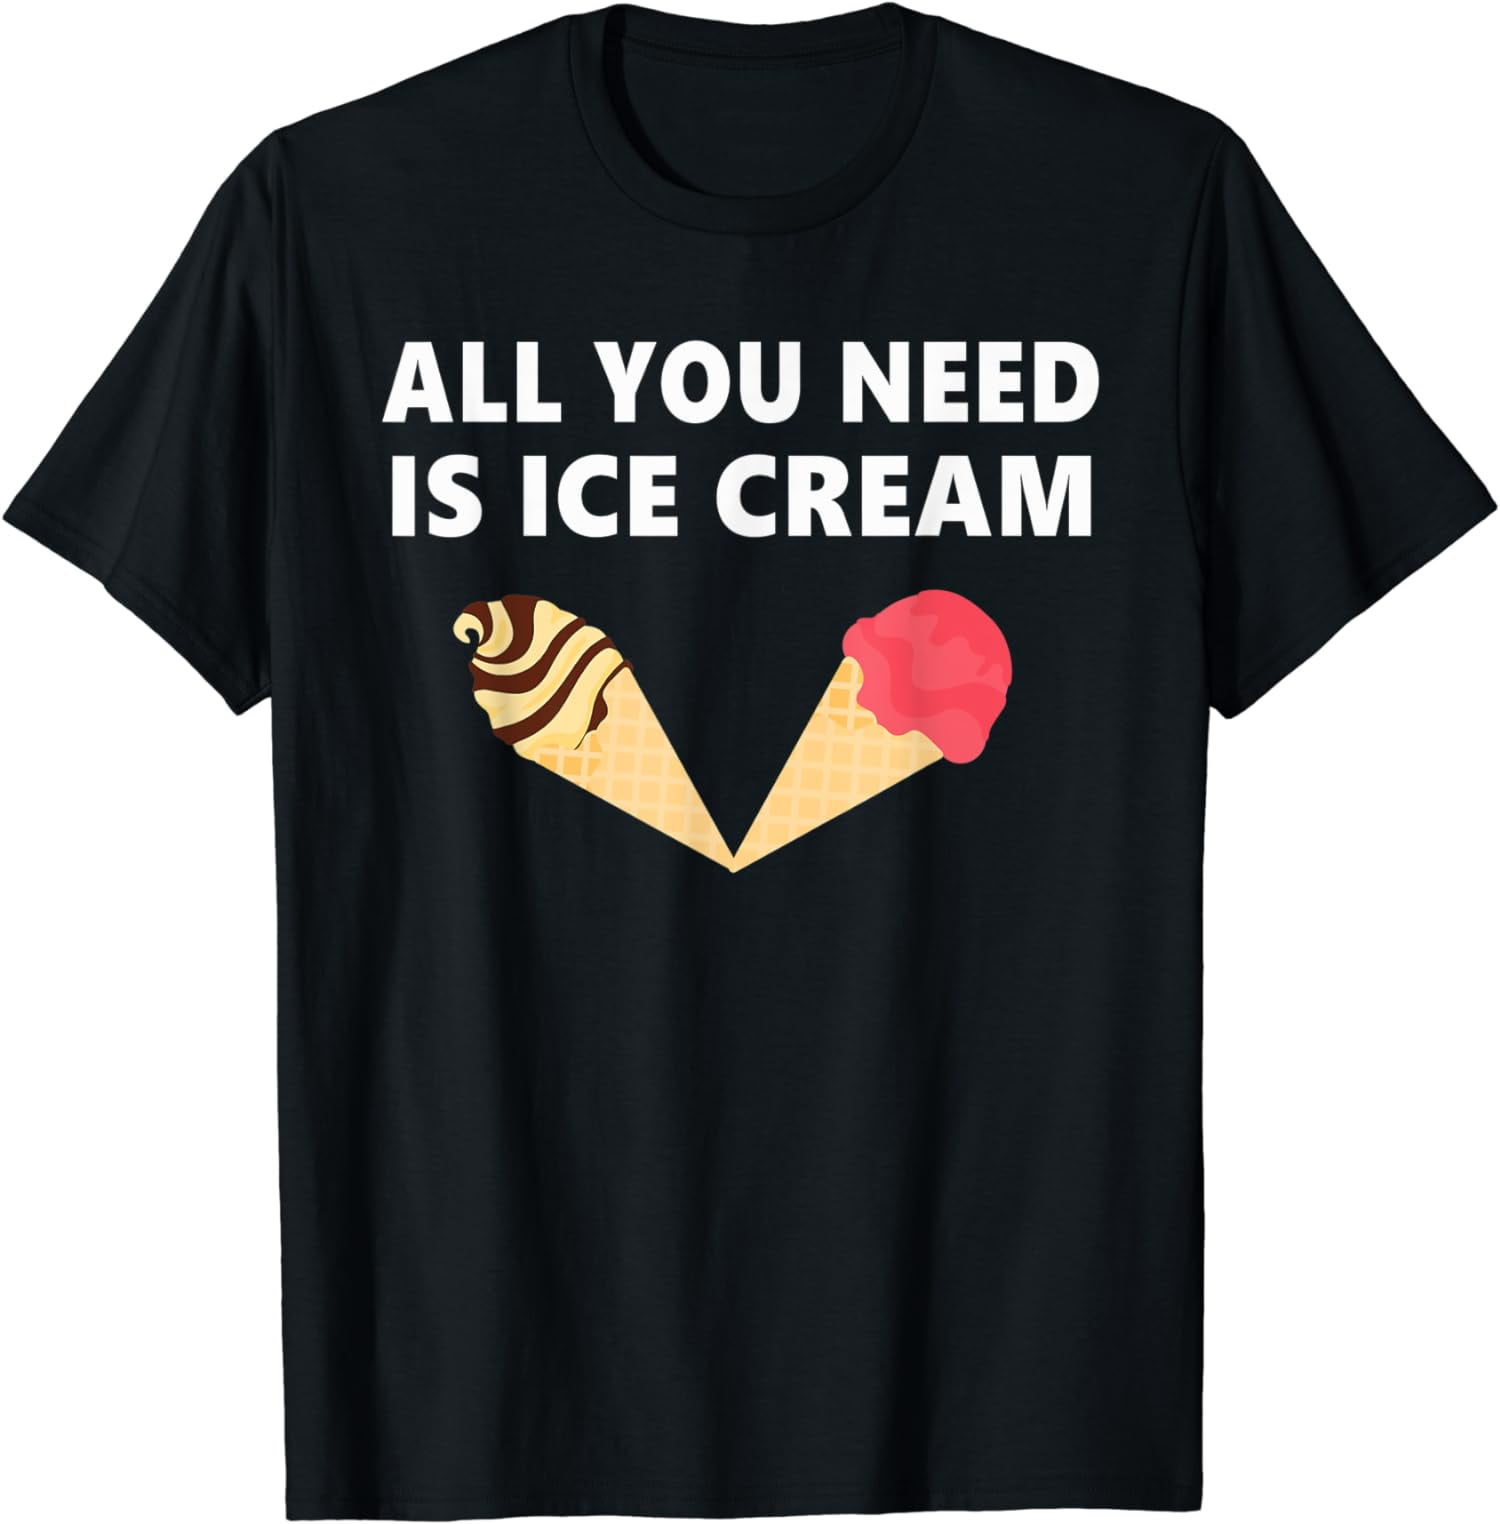 All You Need Is Ice Cream Shirt Funny Cool Love Desserts T-Shirt ...